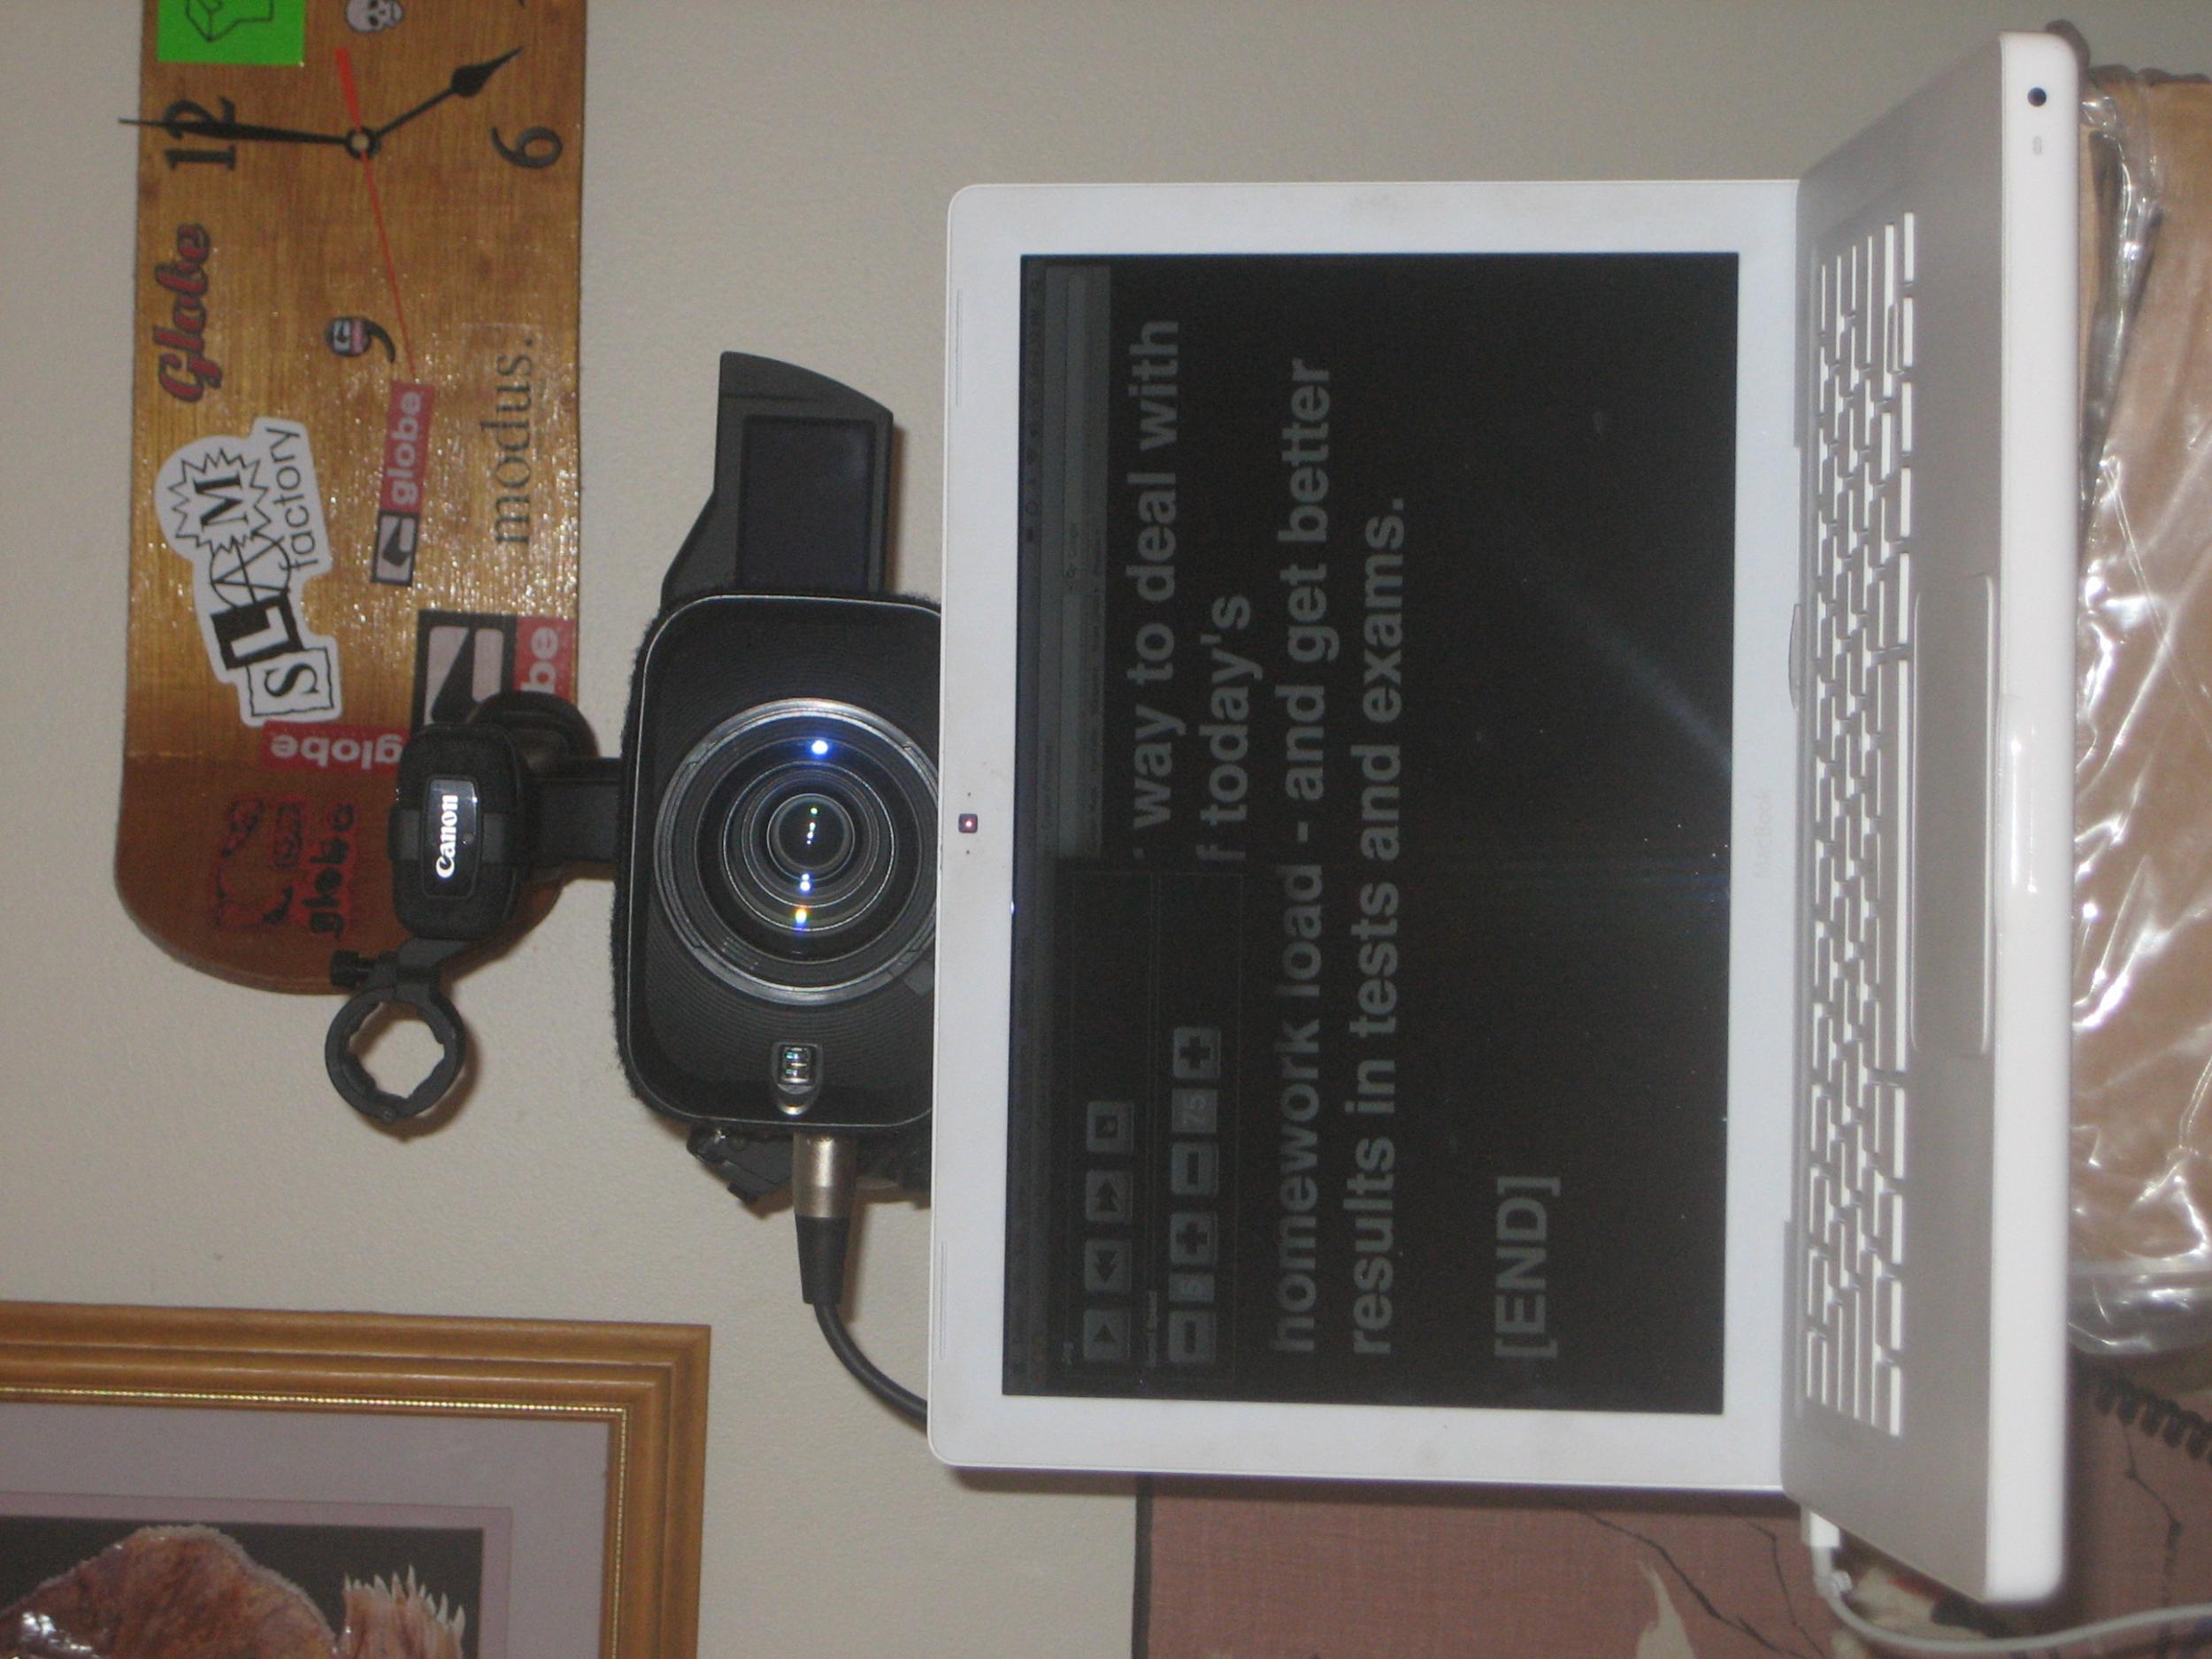 teleprompter for zoom